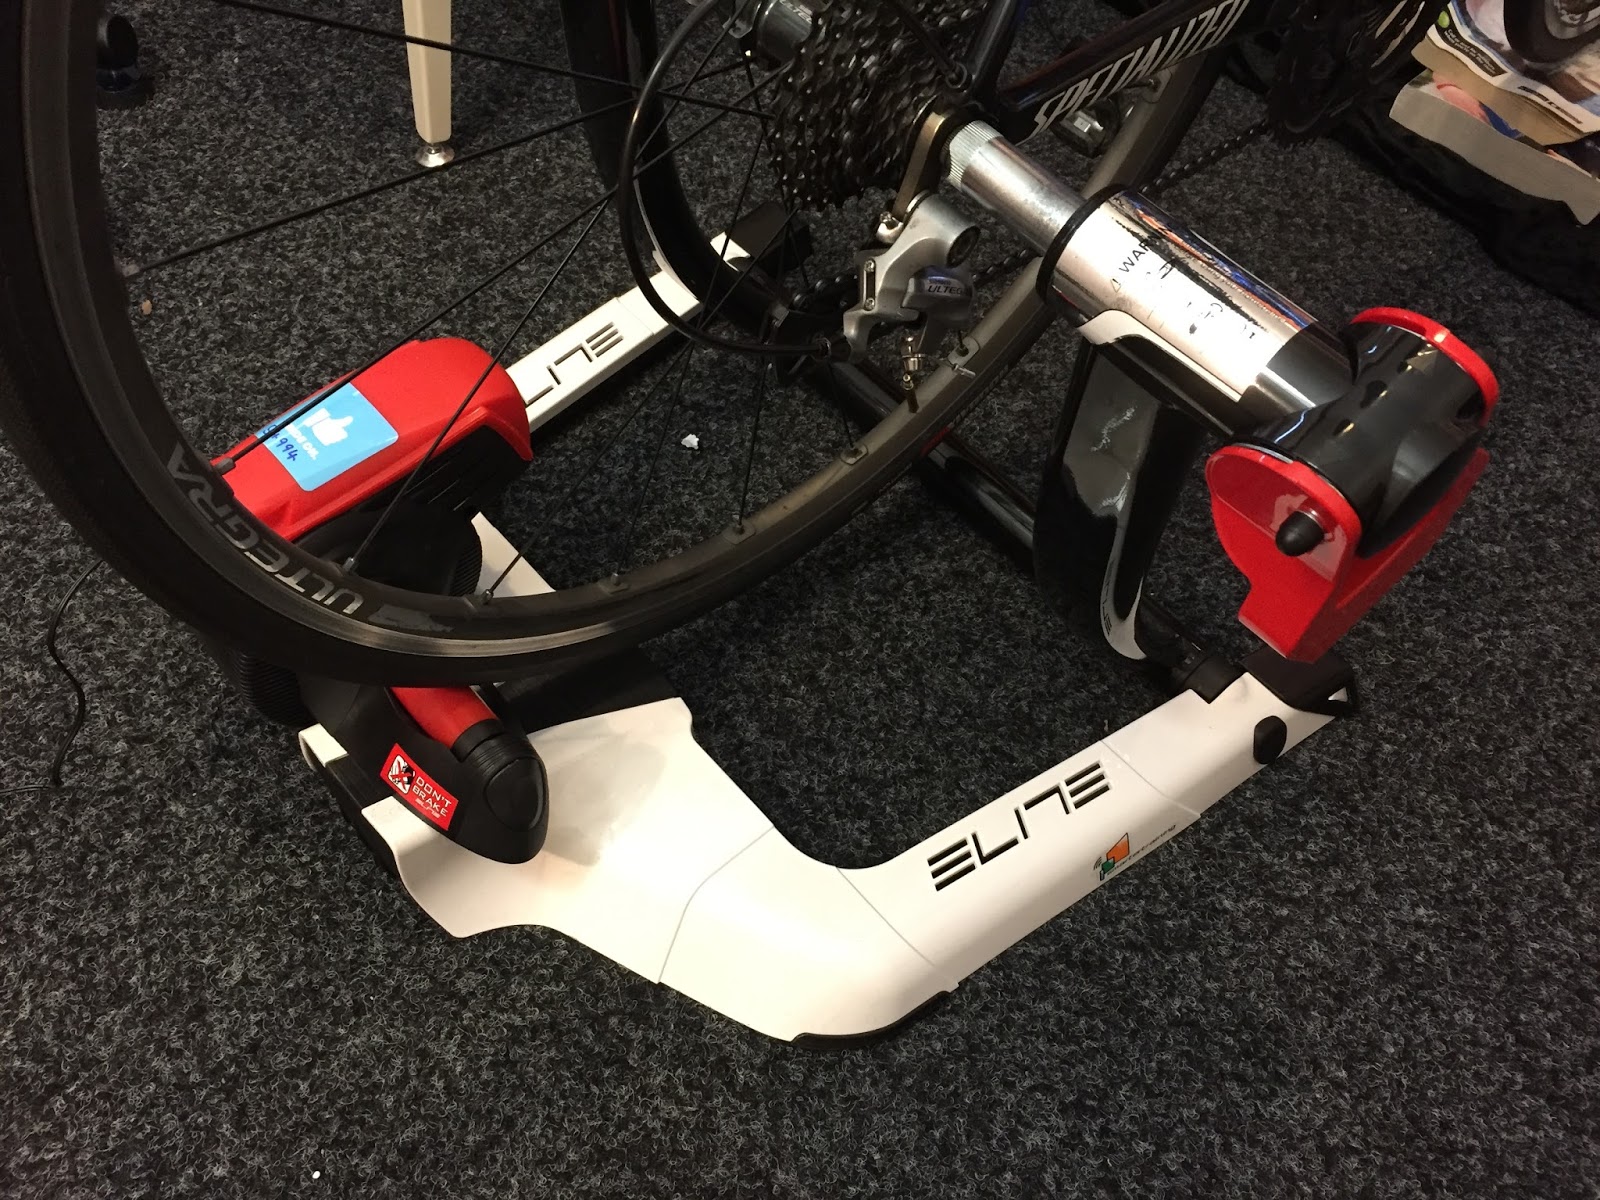 Tales From The Llama Elite Qubo Digital Smart B Smart Trainer Review May 16